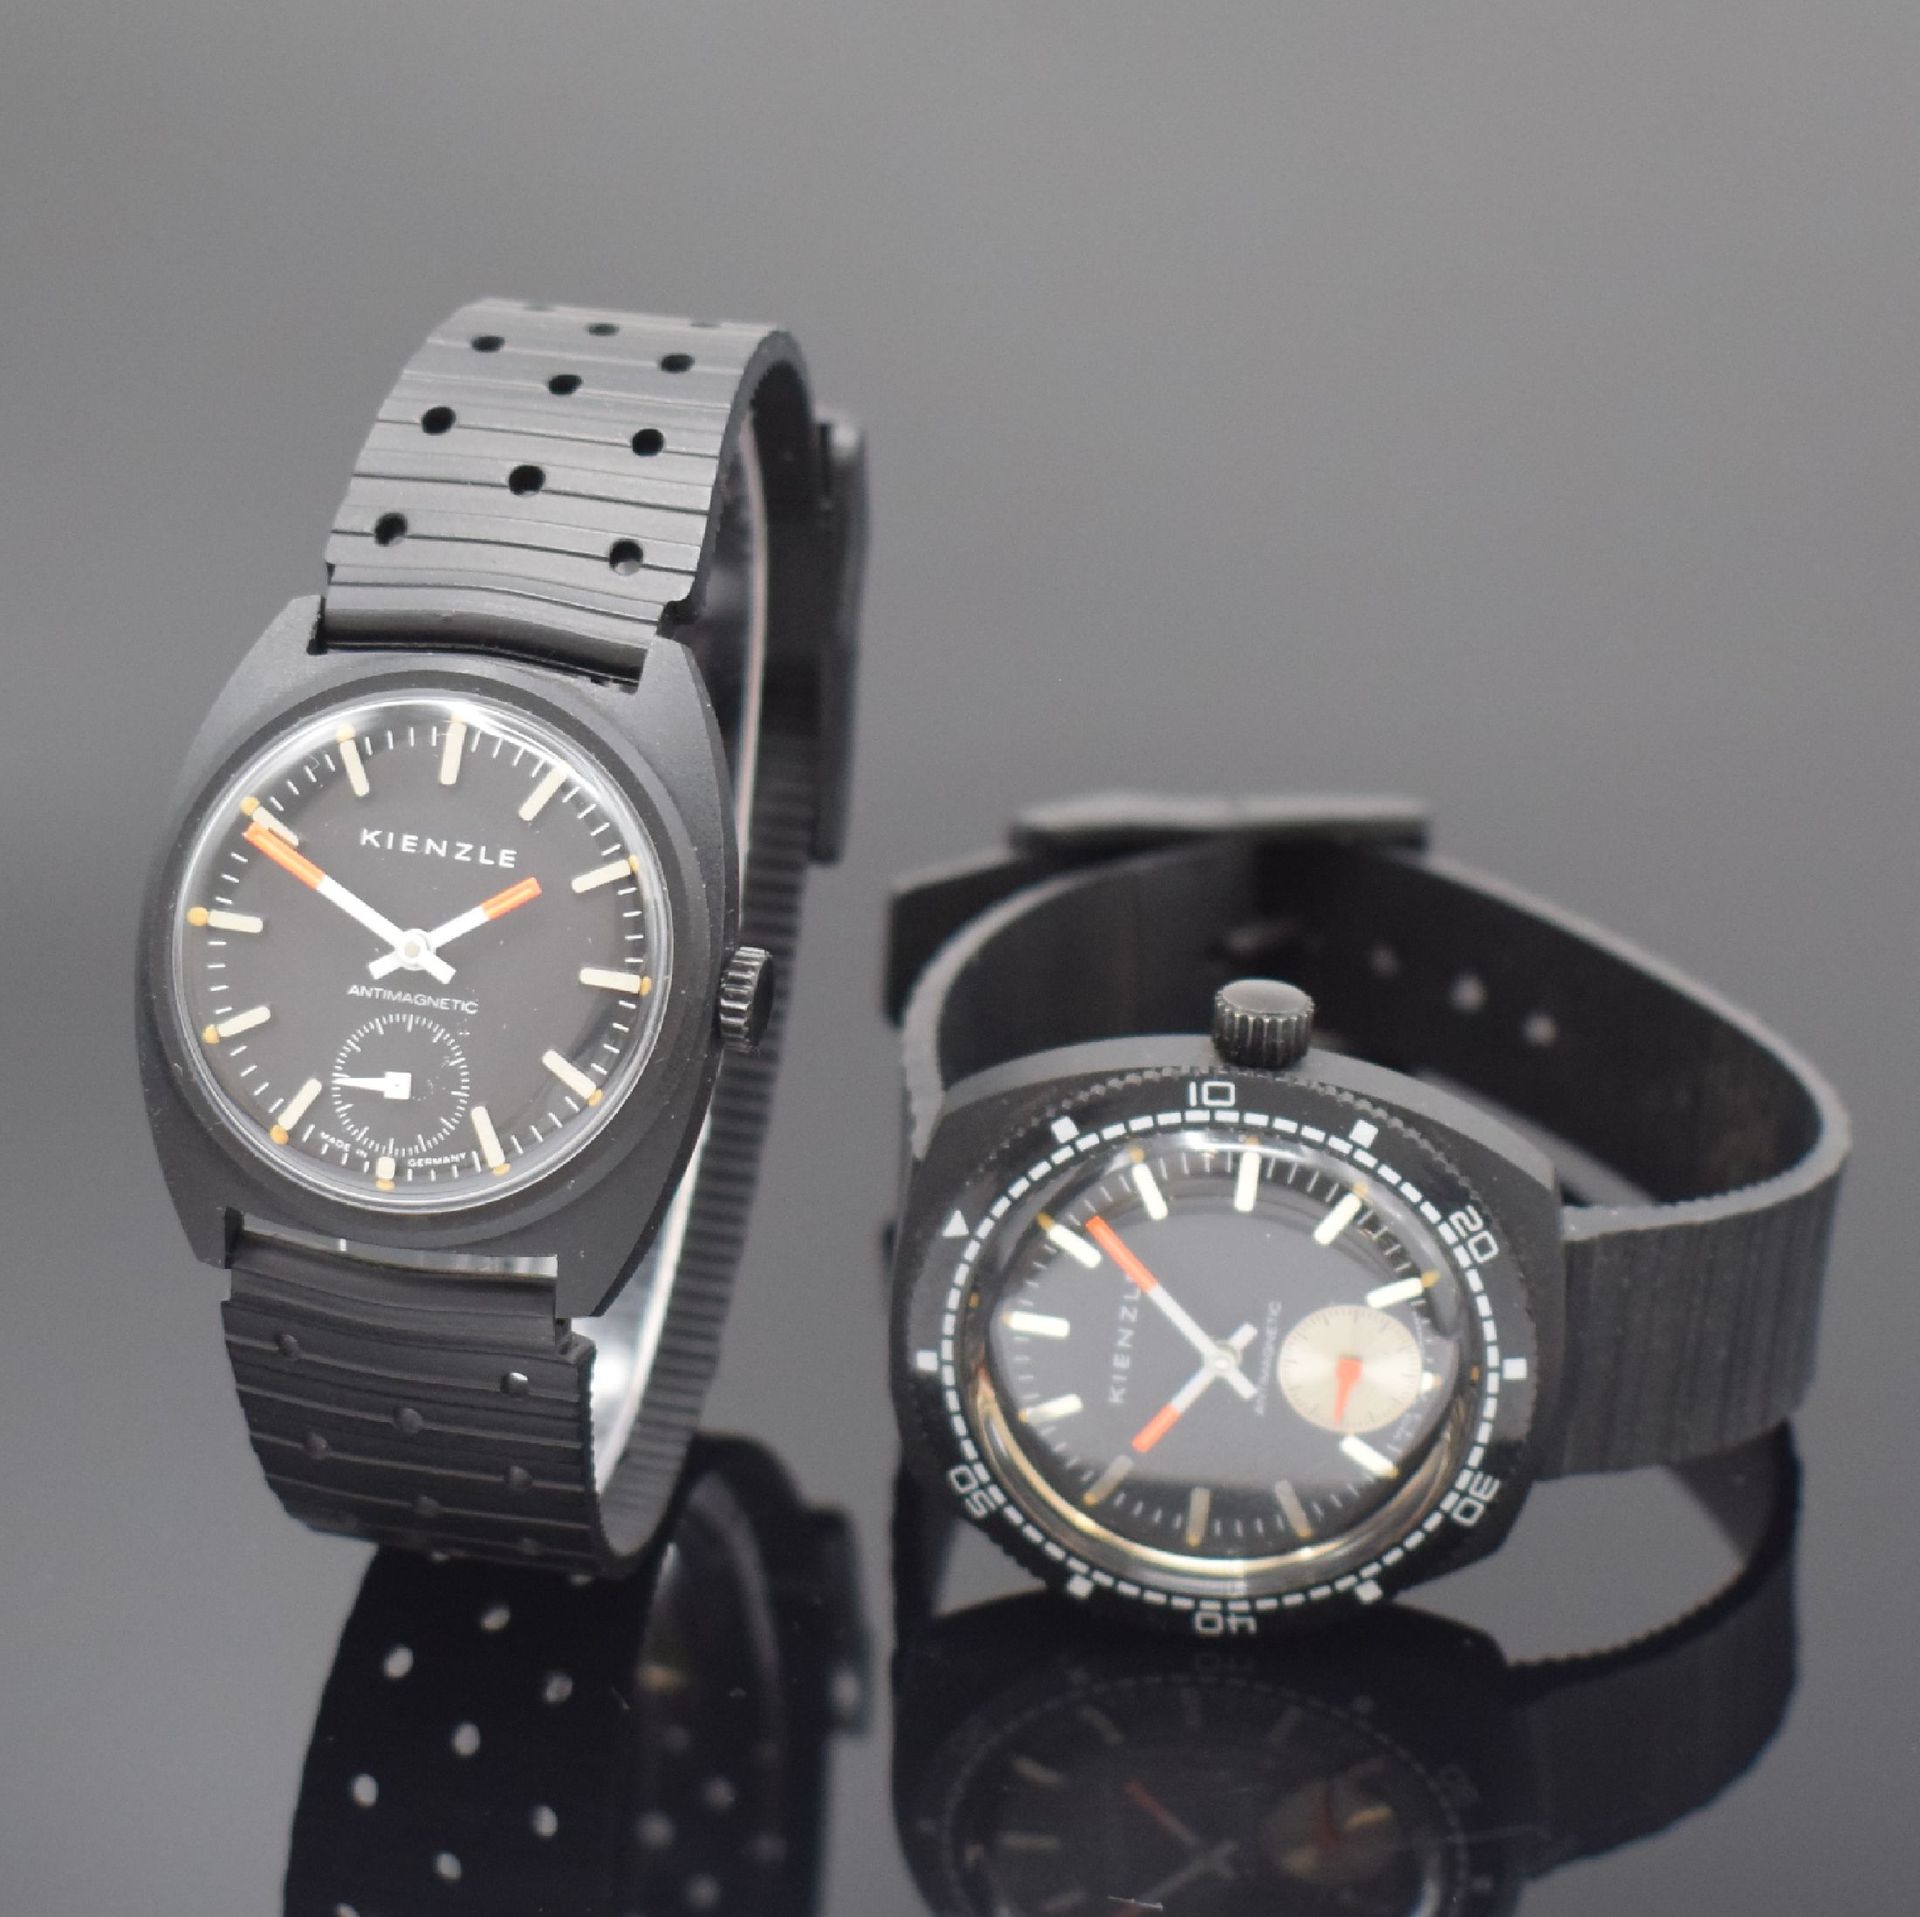 Null KIENZLE 2 sportive, nearly mint wristwatches in blackened cases, both manua&hellip;